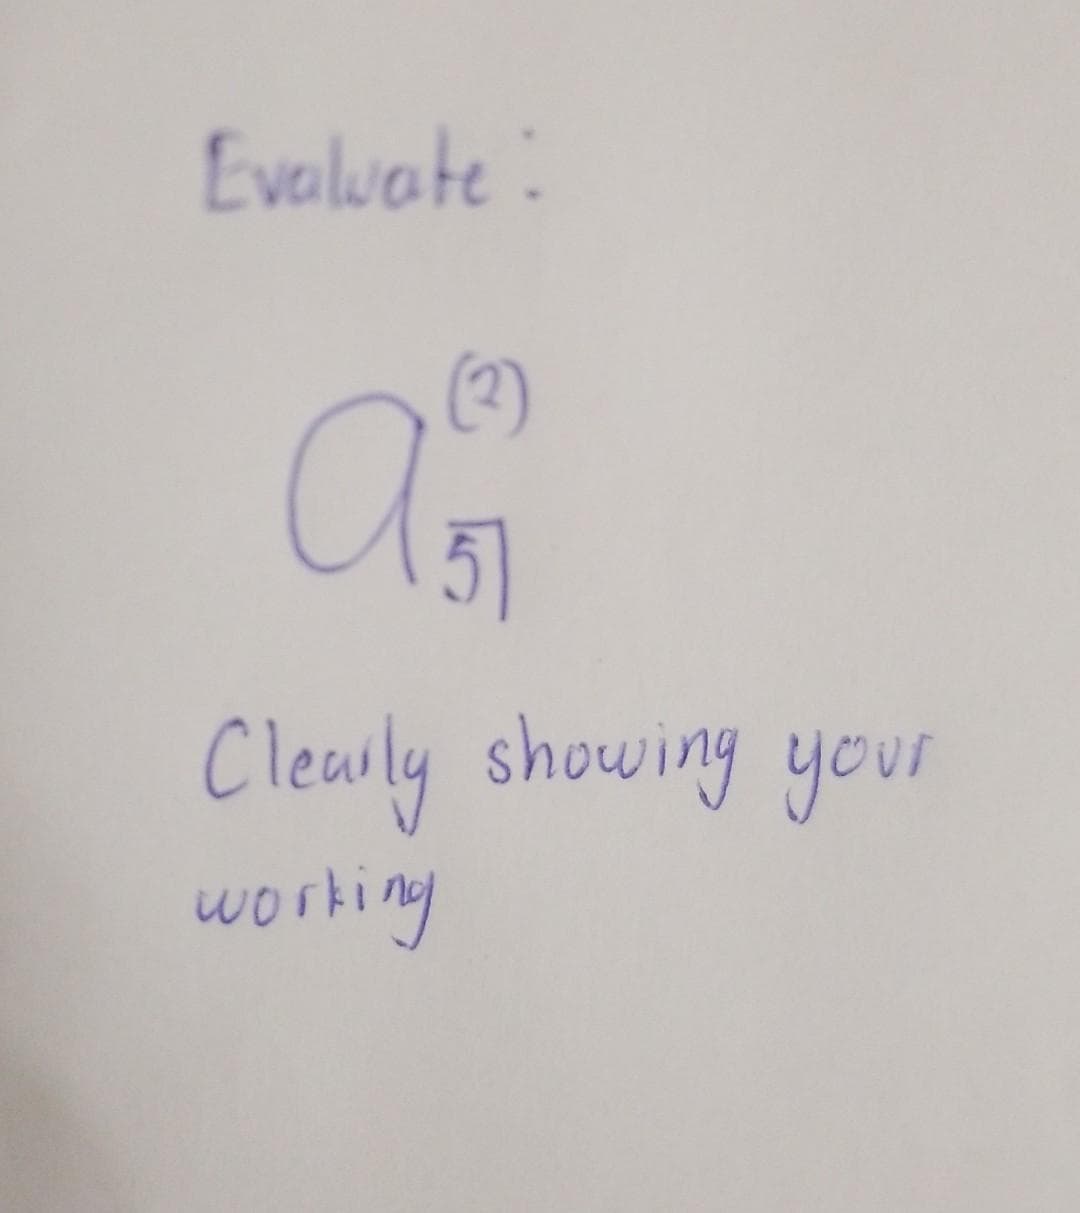 Evaluate:
(3)
51
Clearly showing your
working